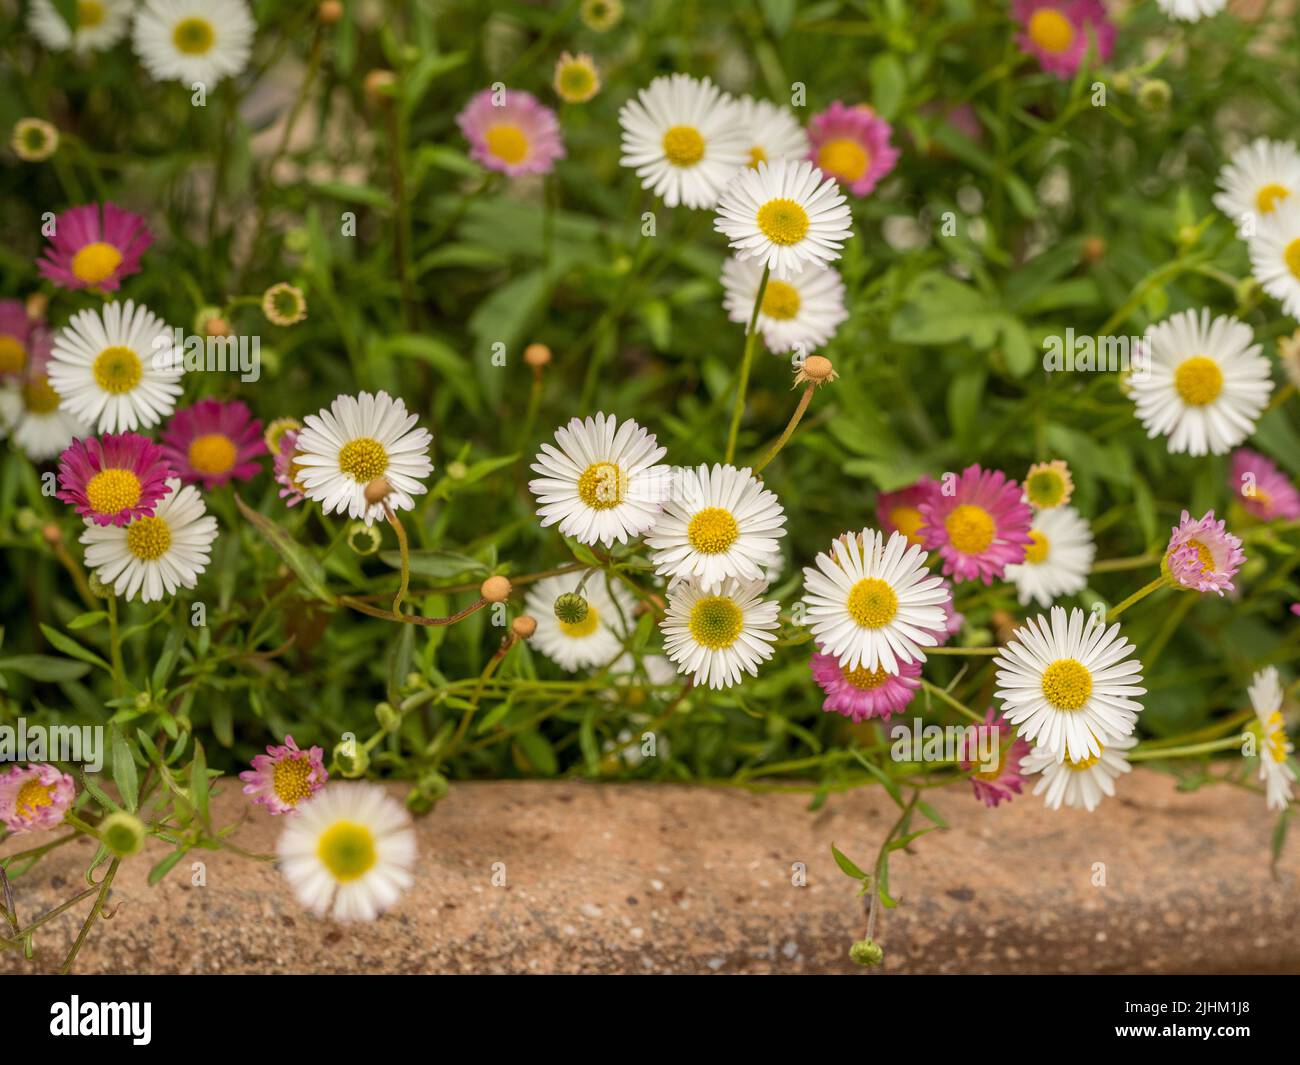 Pink and white daisy flowers of Erigeron karvinskianus also known as Mexican fleabane, growing in a terracotta plant pot. Stock Photo